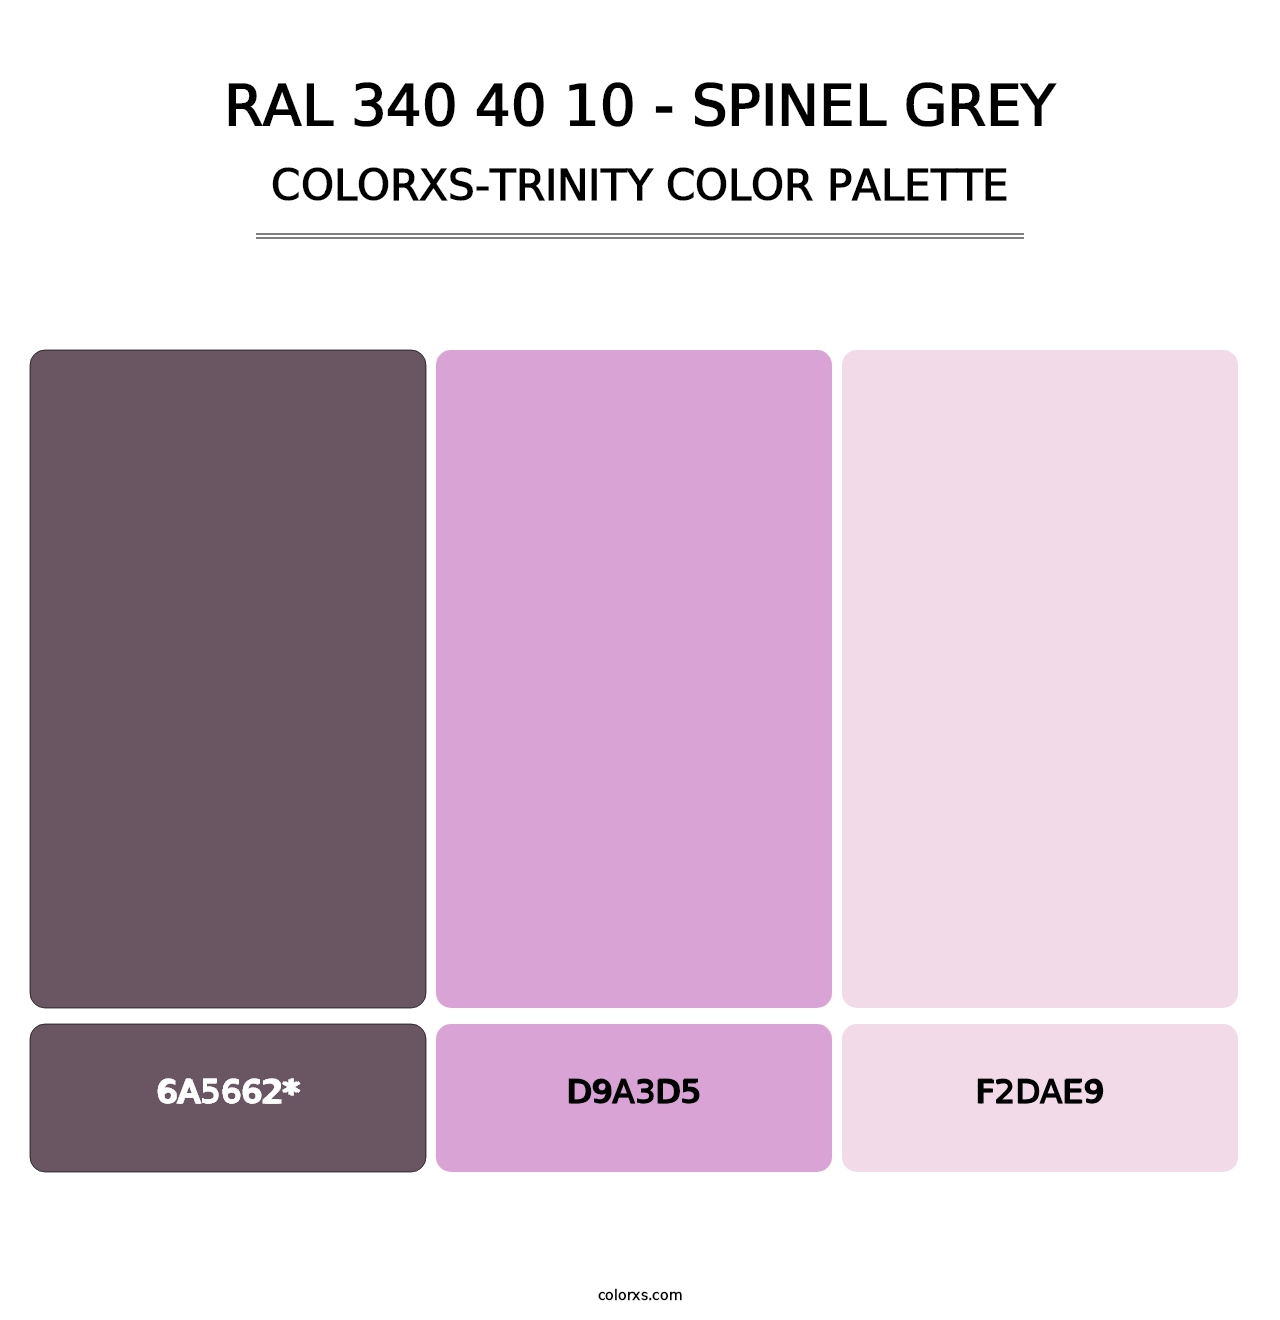 RAL 340 40 10 - Spinel Grey - Colorxs Trinity Palette